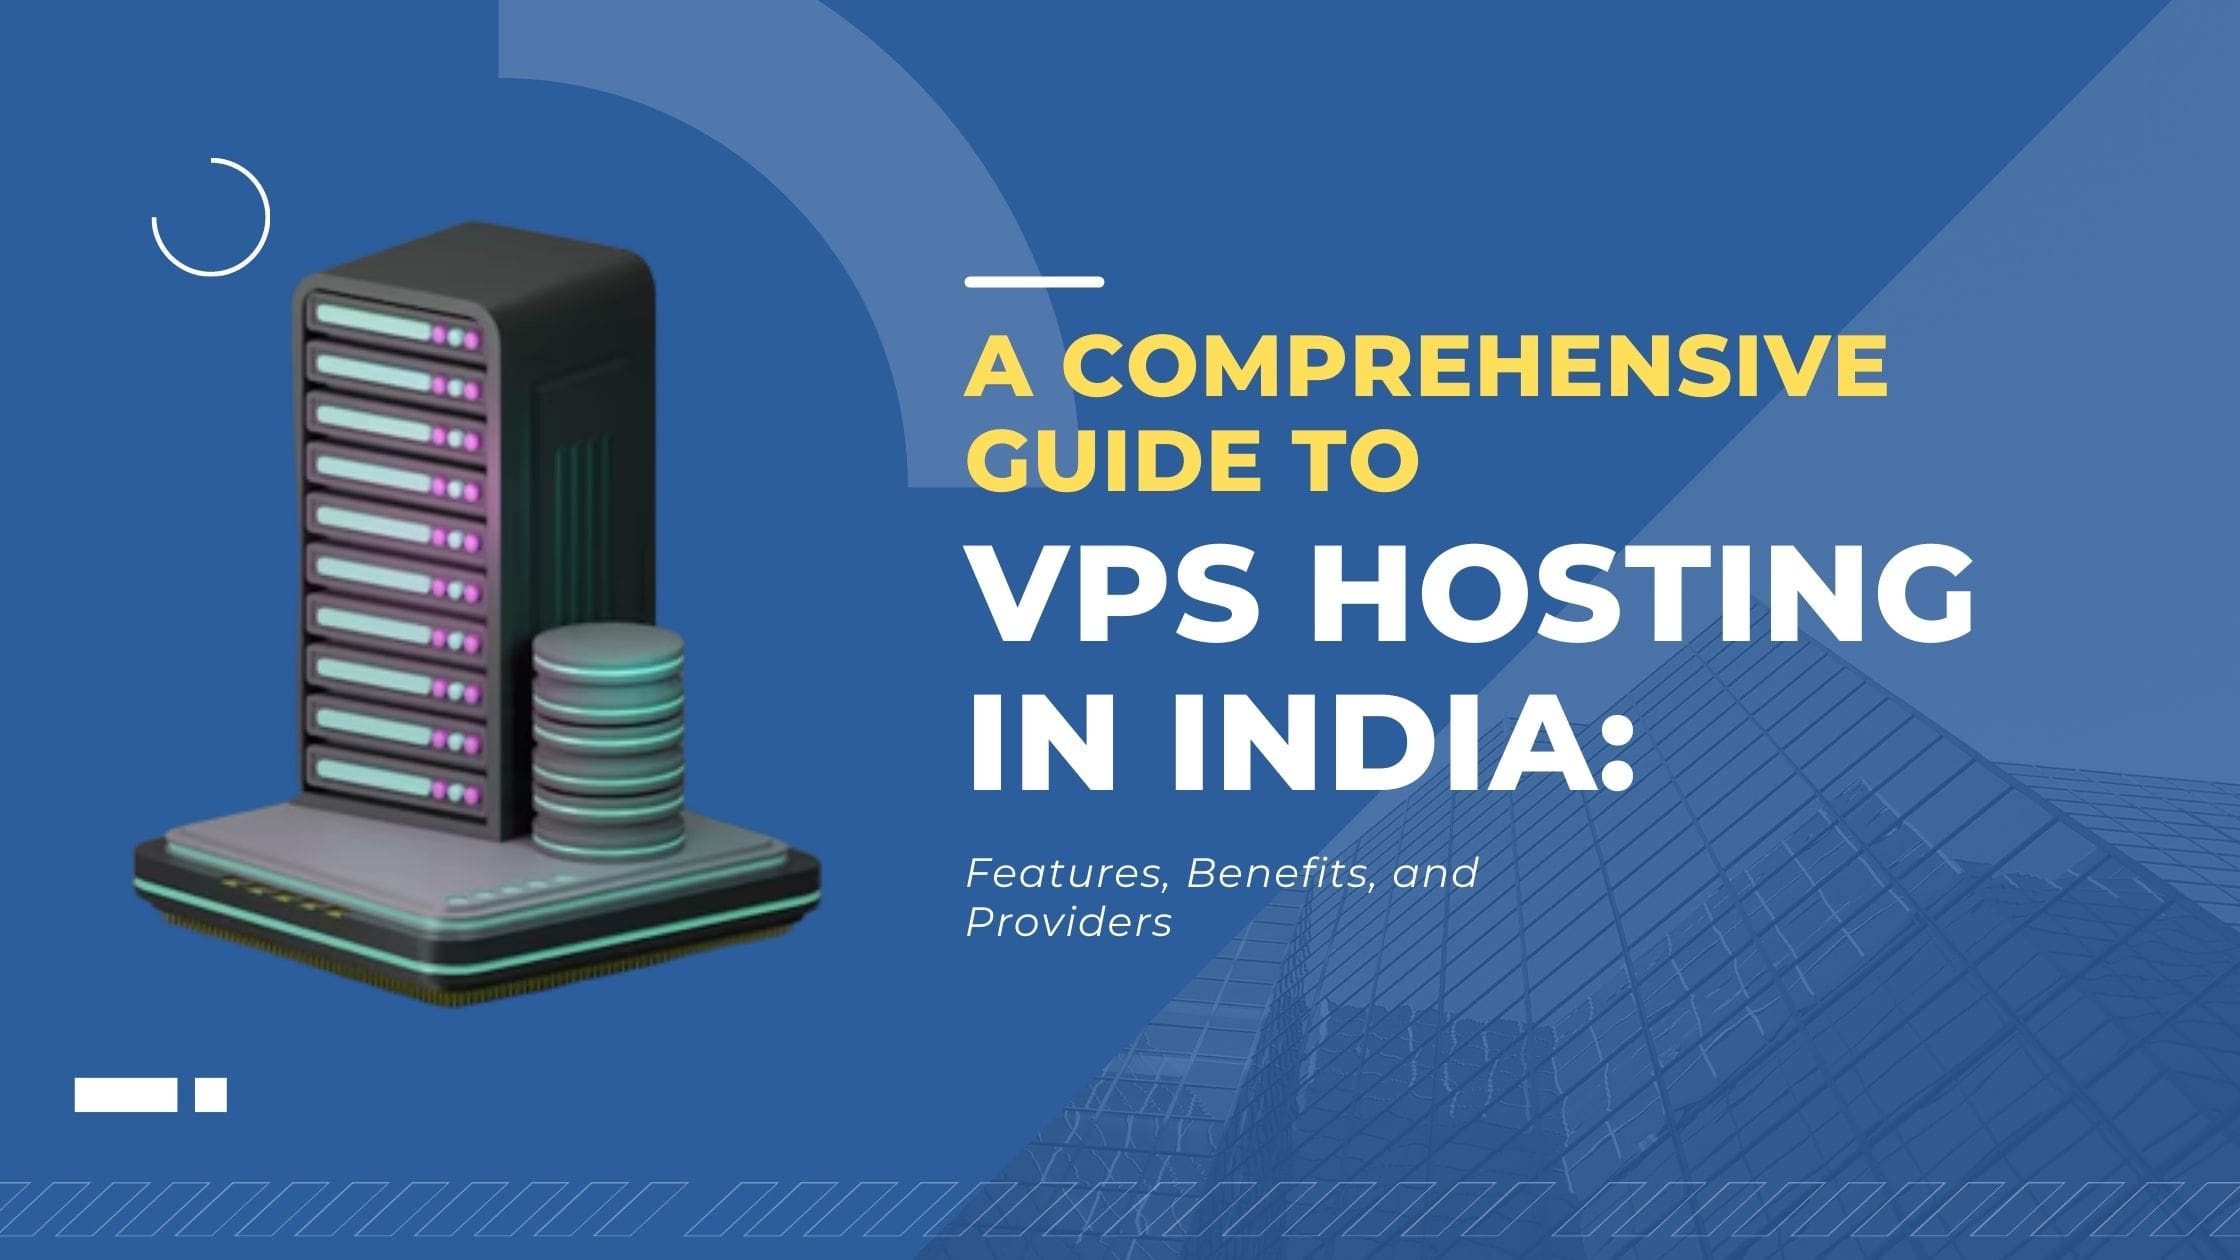 A comprehensive guide to VPS hosting in India: Features, Benefits, and Providers